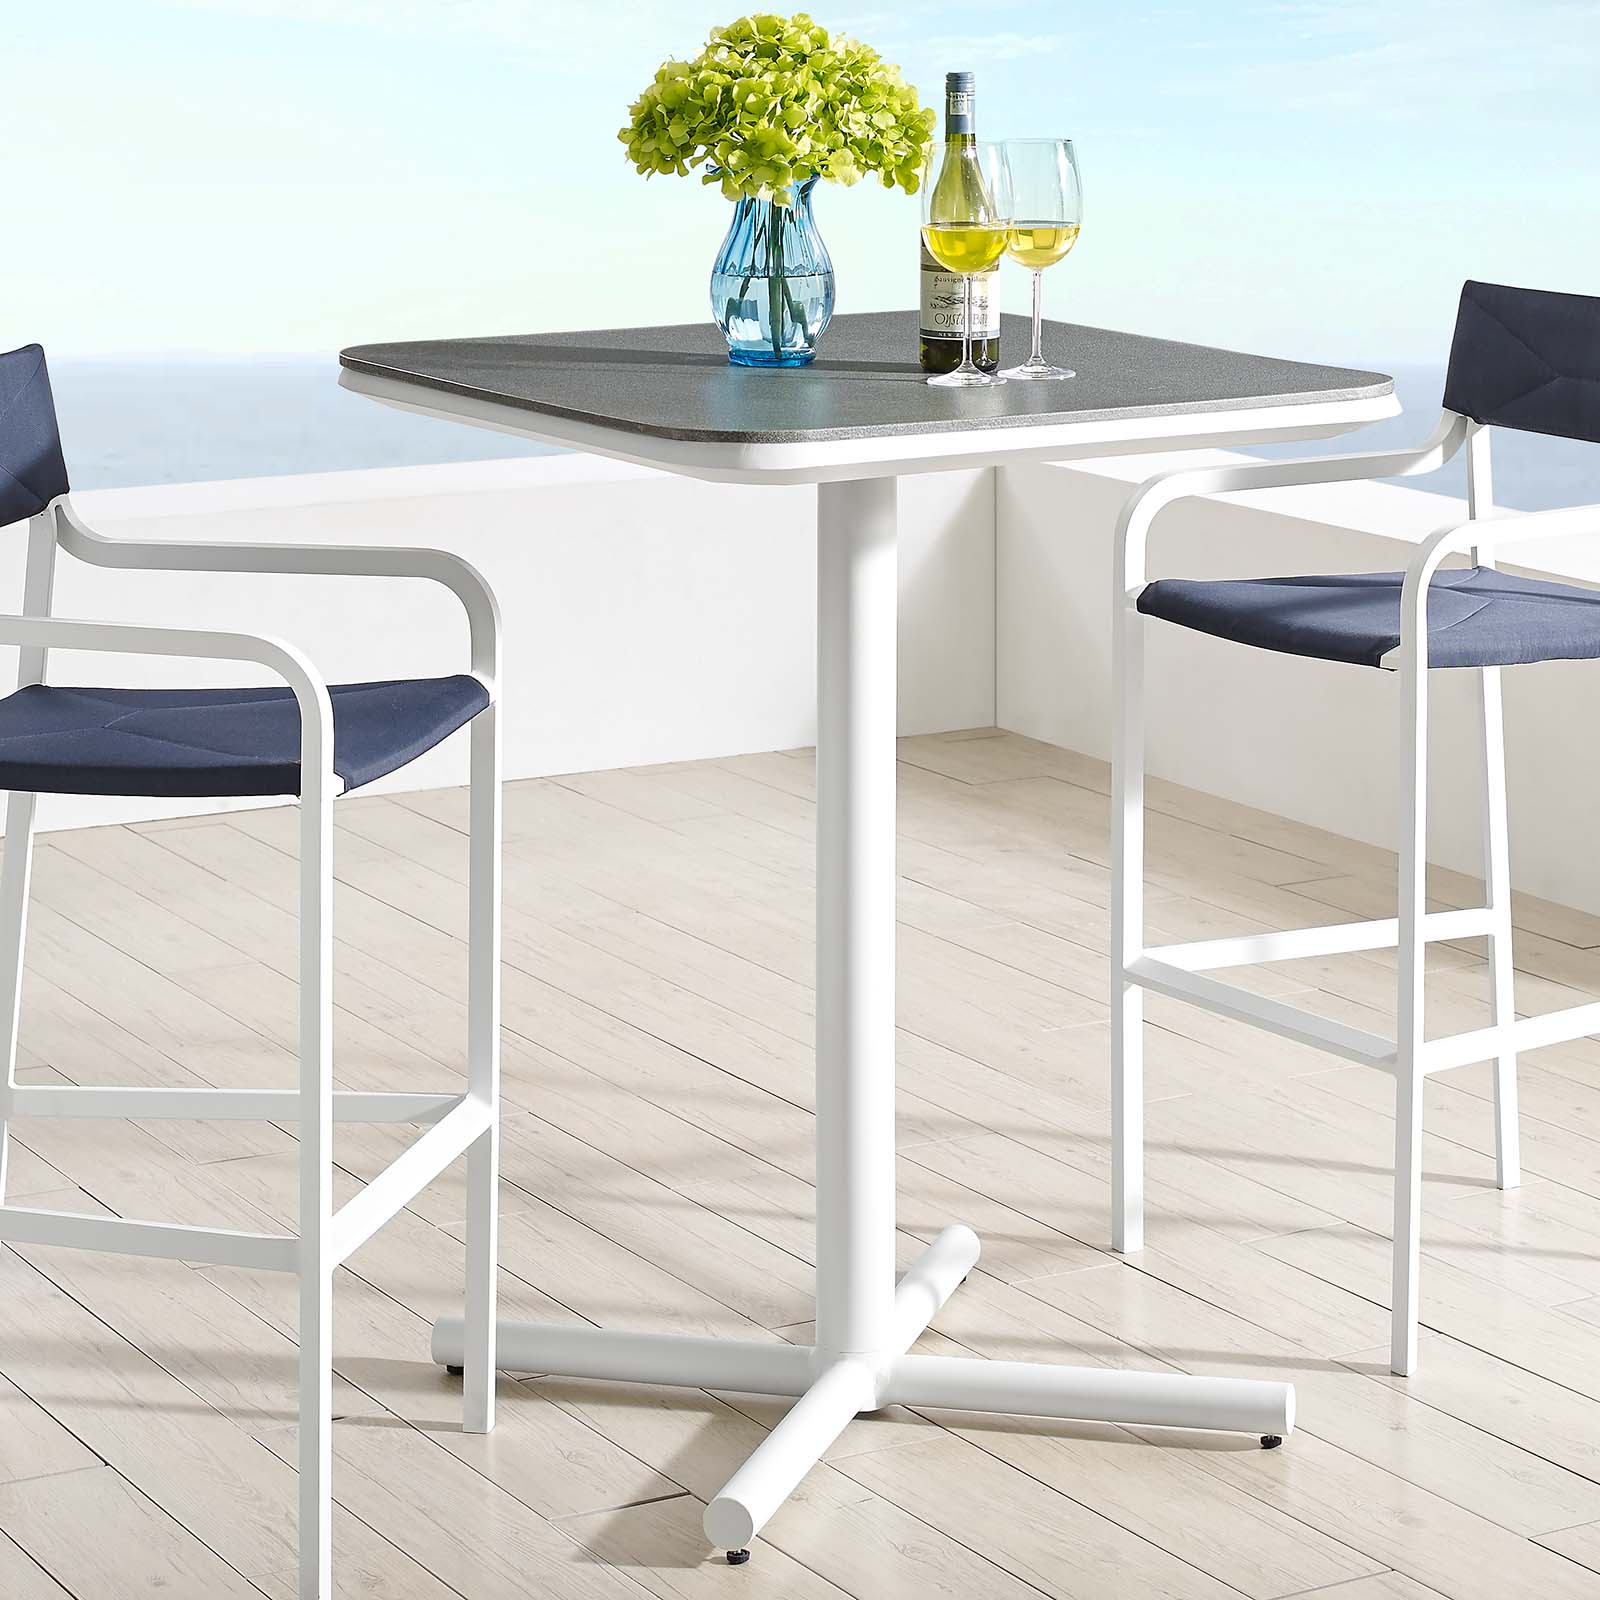 Modway Raleigh Modern Style Aluminum Outdoor Patio Bar Table in White - image 2 of 7